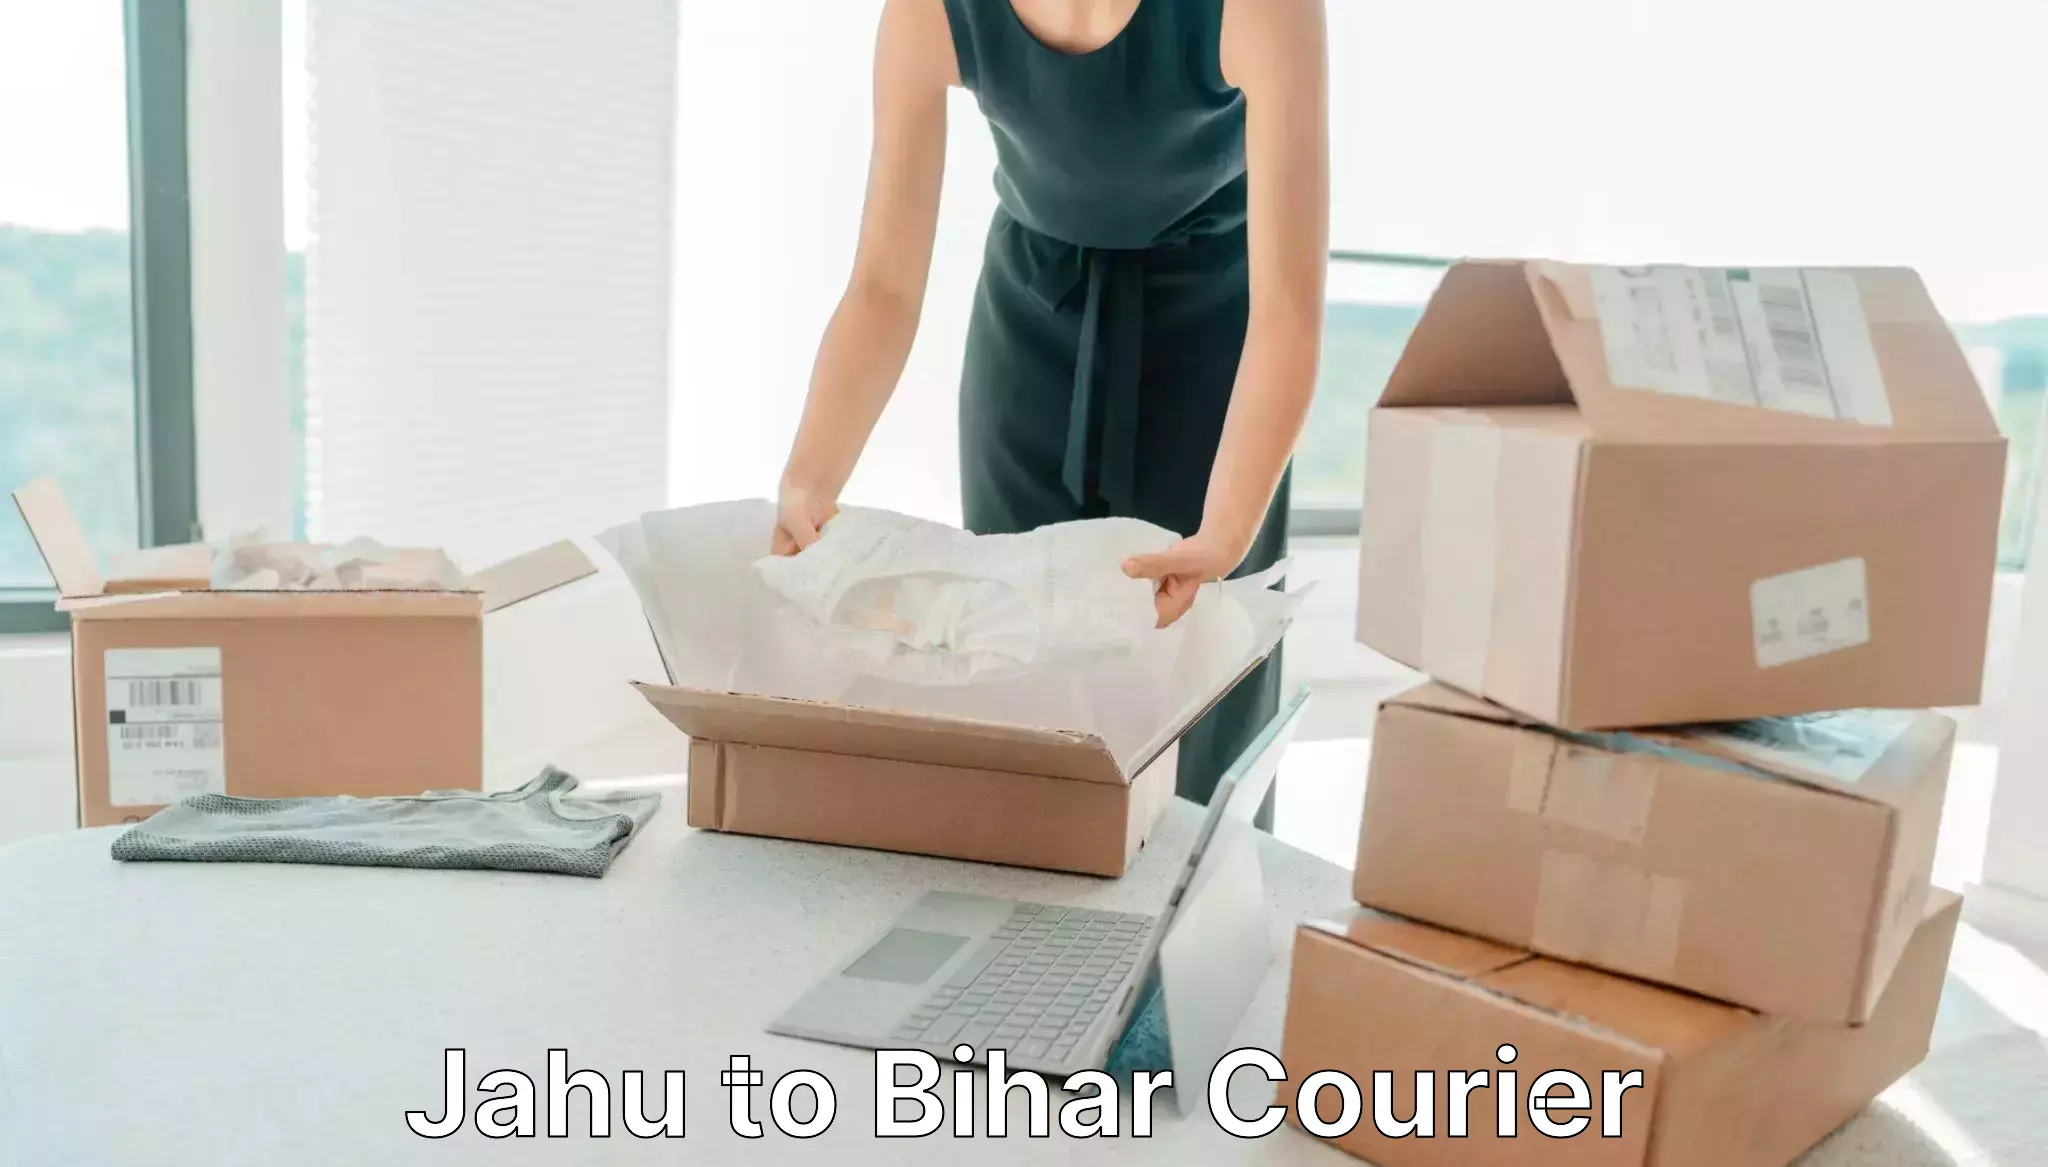 Reliable delivery network Jahu to Rajgir